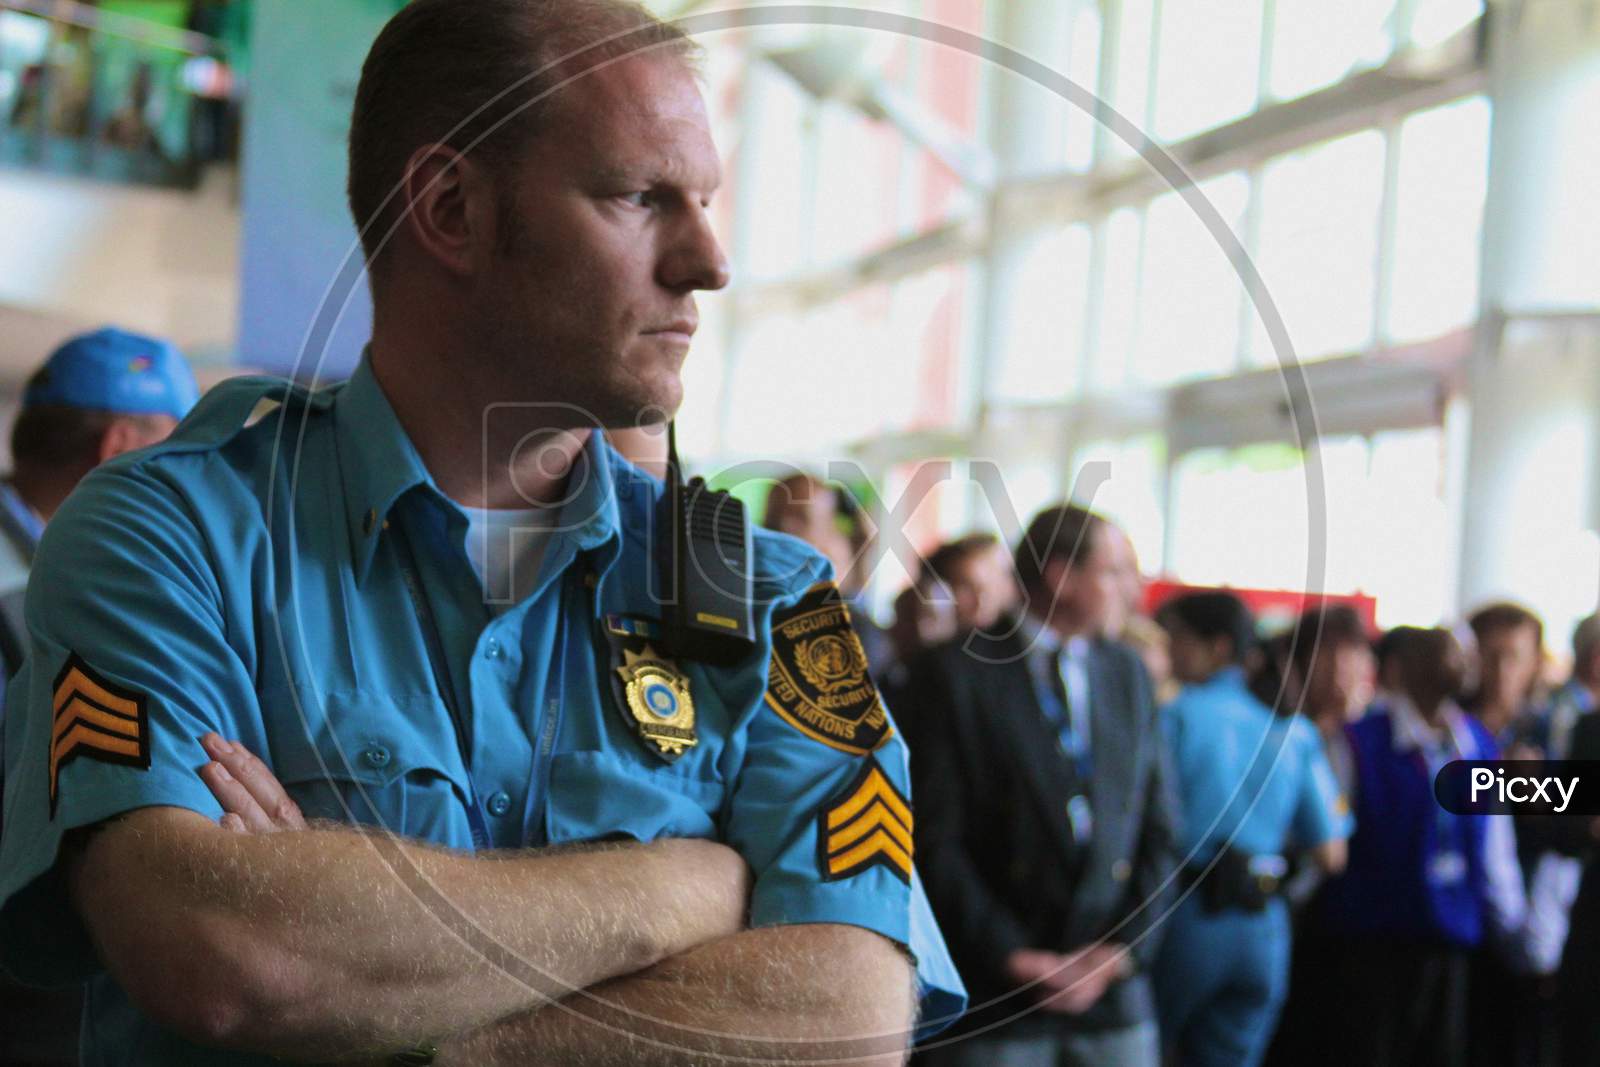 New York - July 26 2020: A Glimpse Of Police Portraits In The United States Who Are Guarding And Securing People At Airports To Be Able To Comfortably Board Planes.